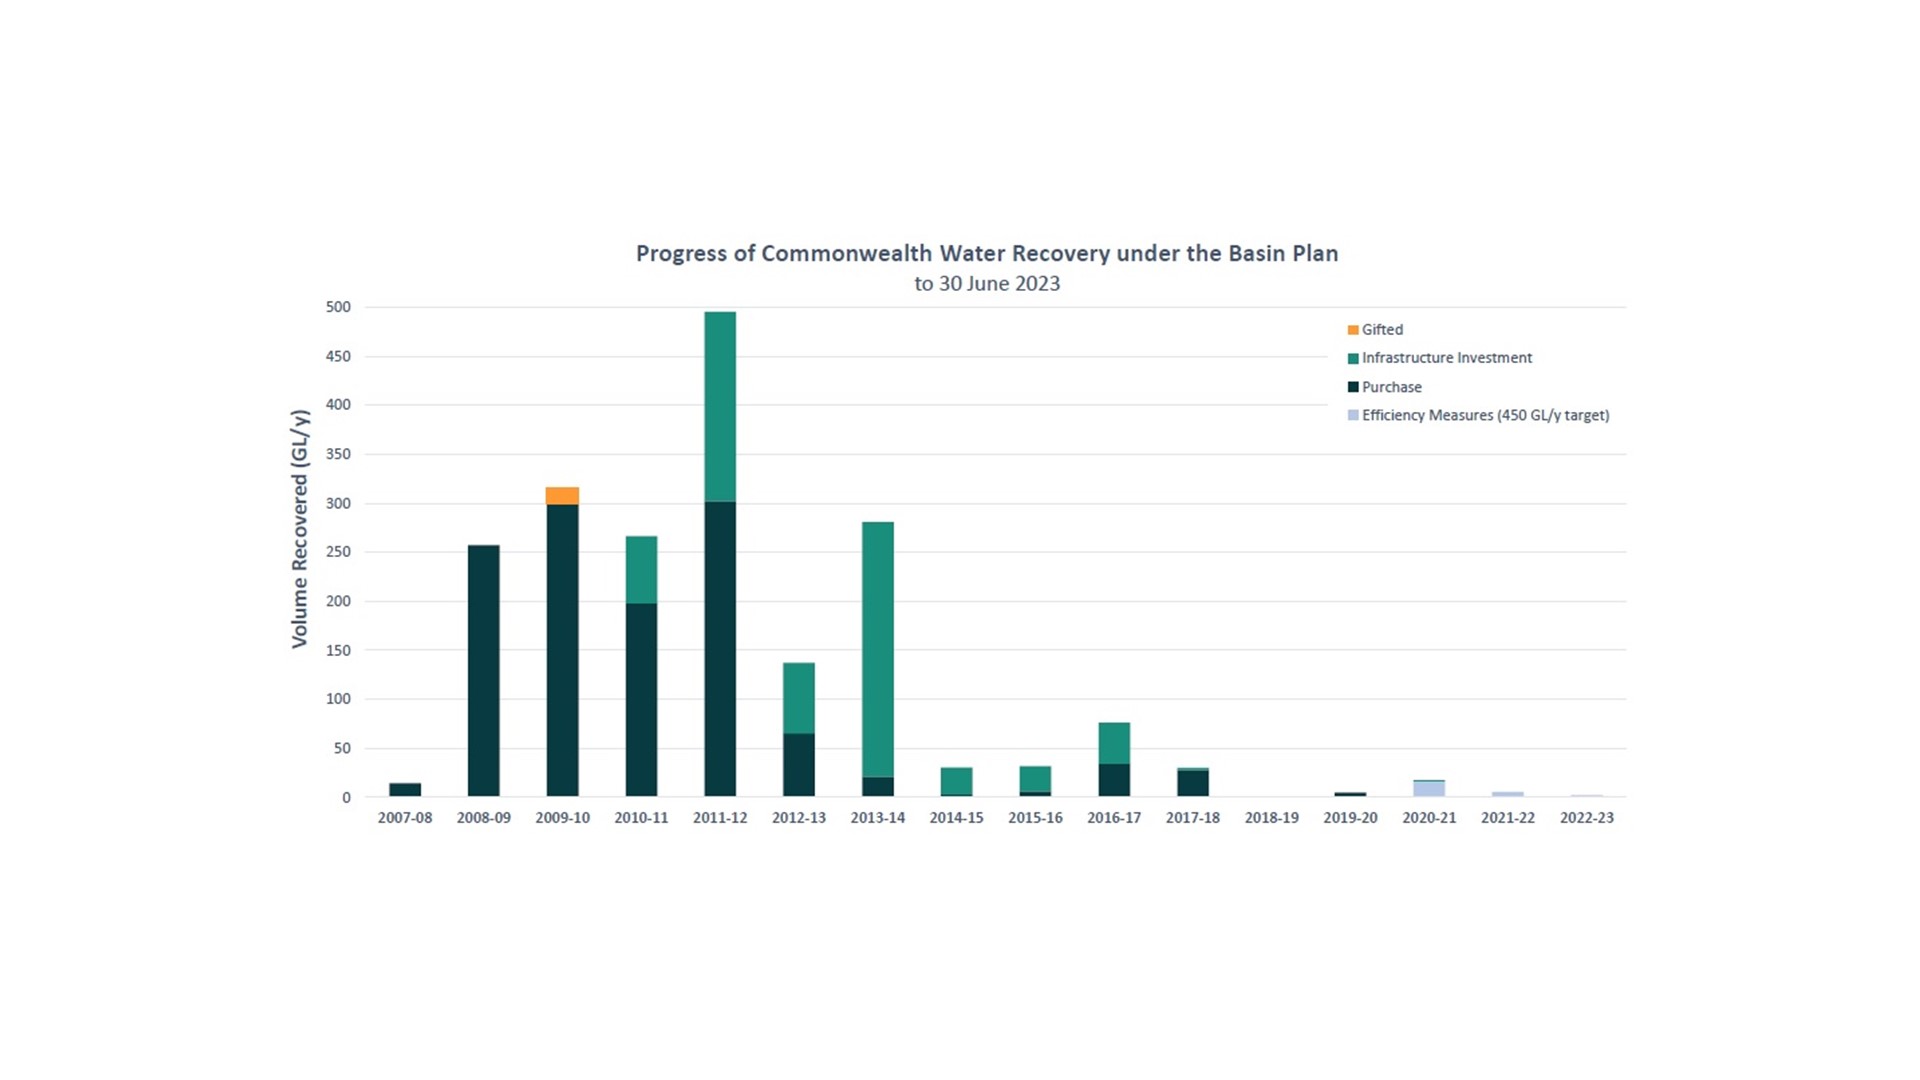 A graph showing the progress of commonwealth water recovery